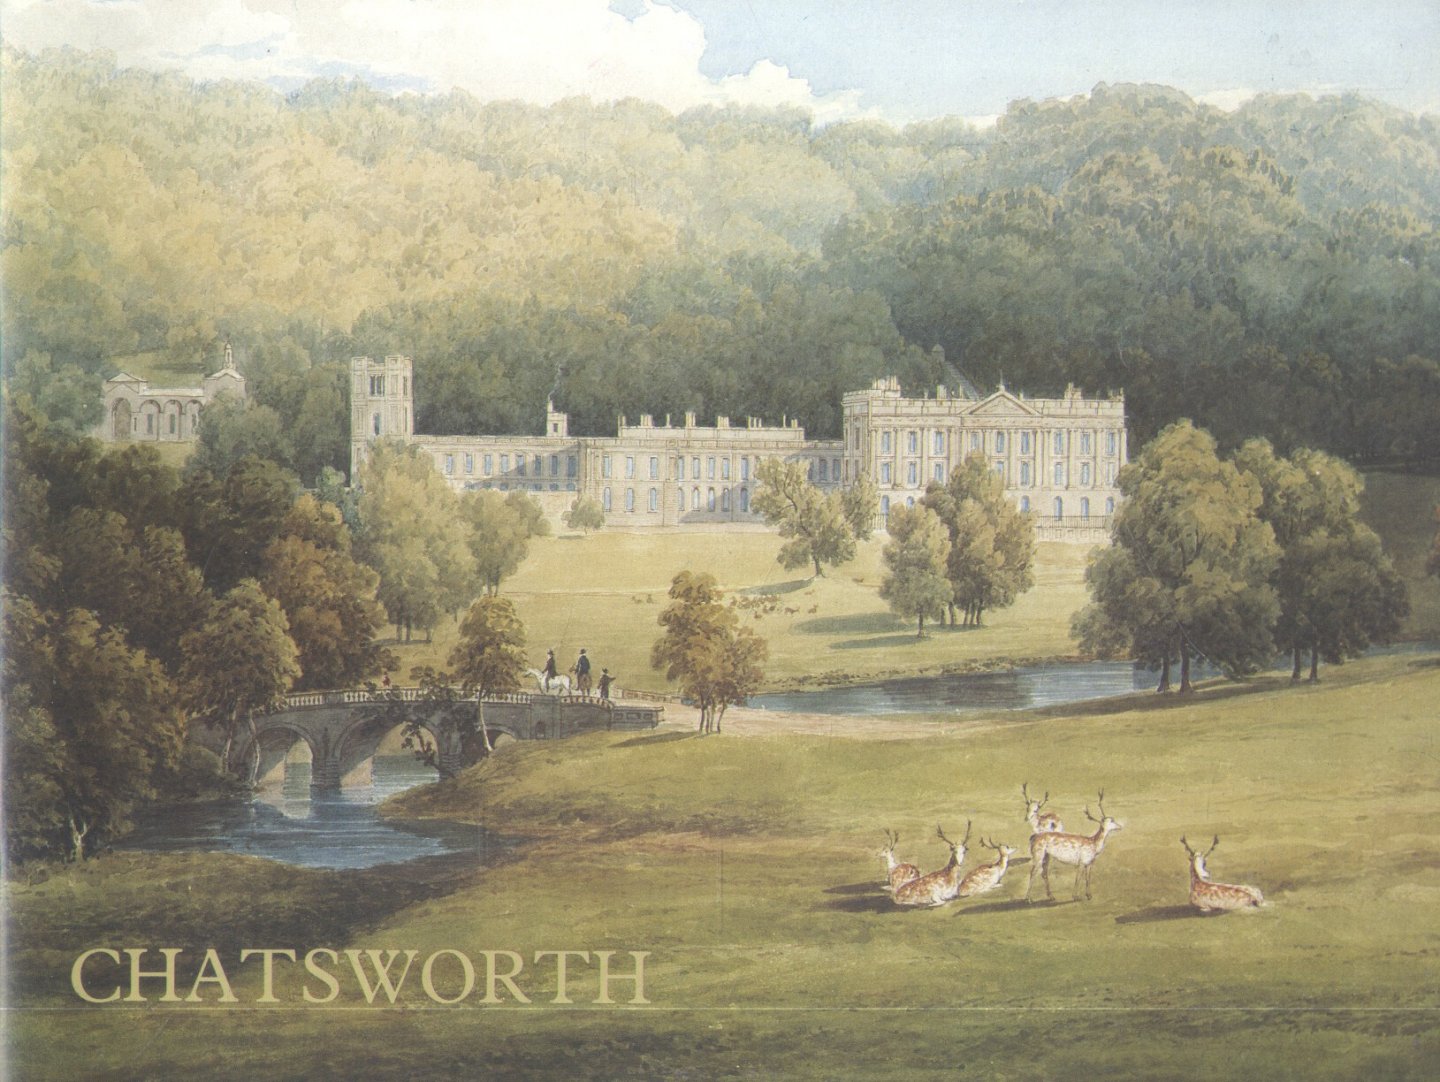 Duchess of Devonshire - Chatsworth (The home of the Duke and Duchess of Devonshire)